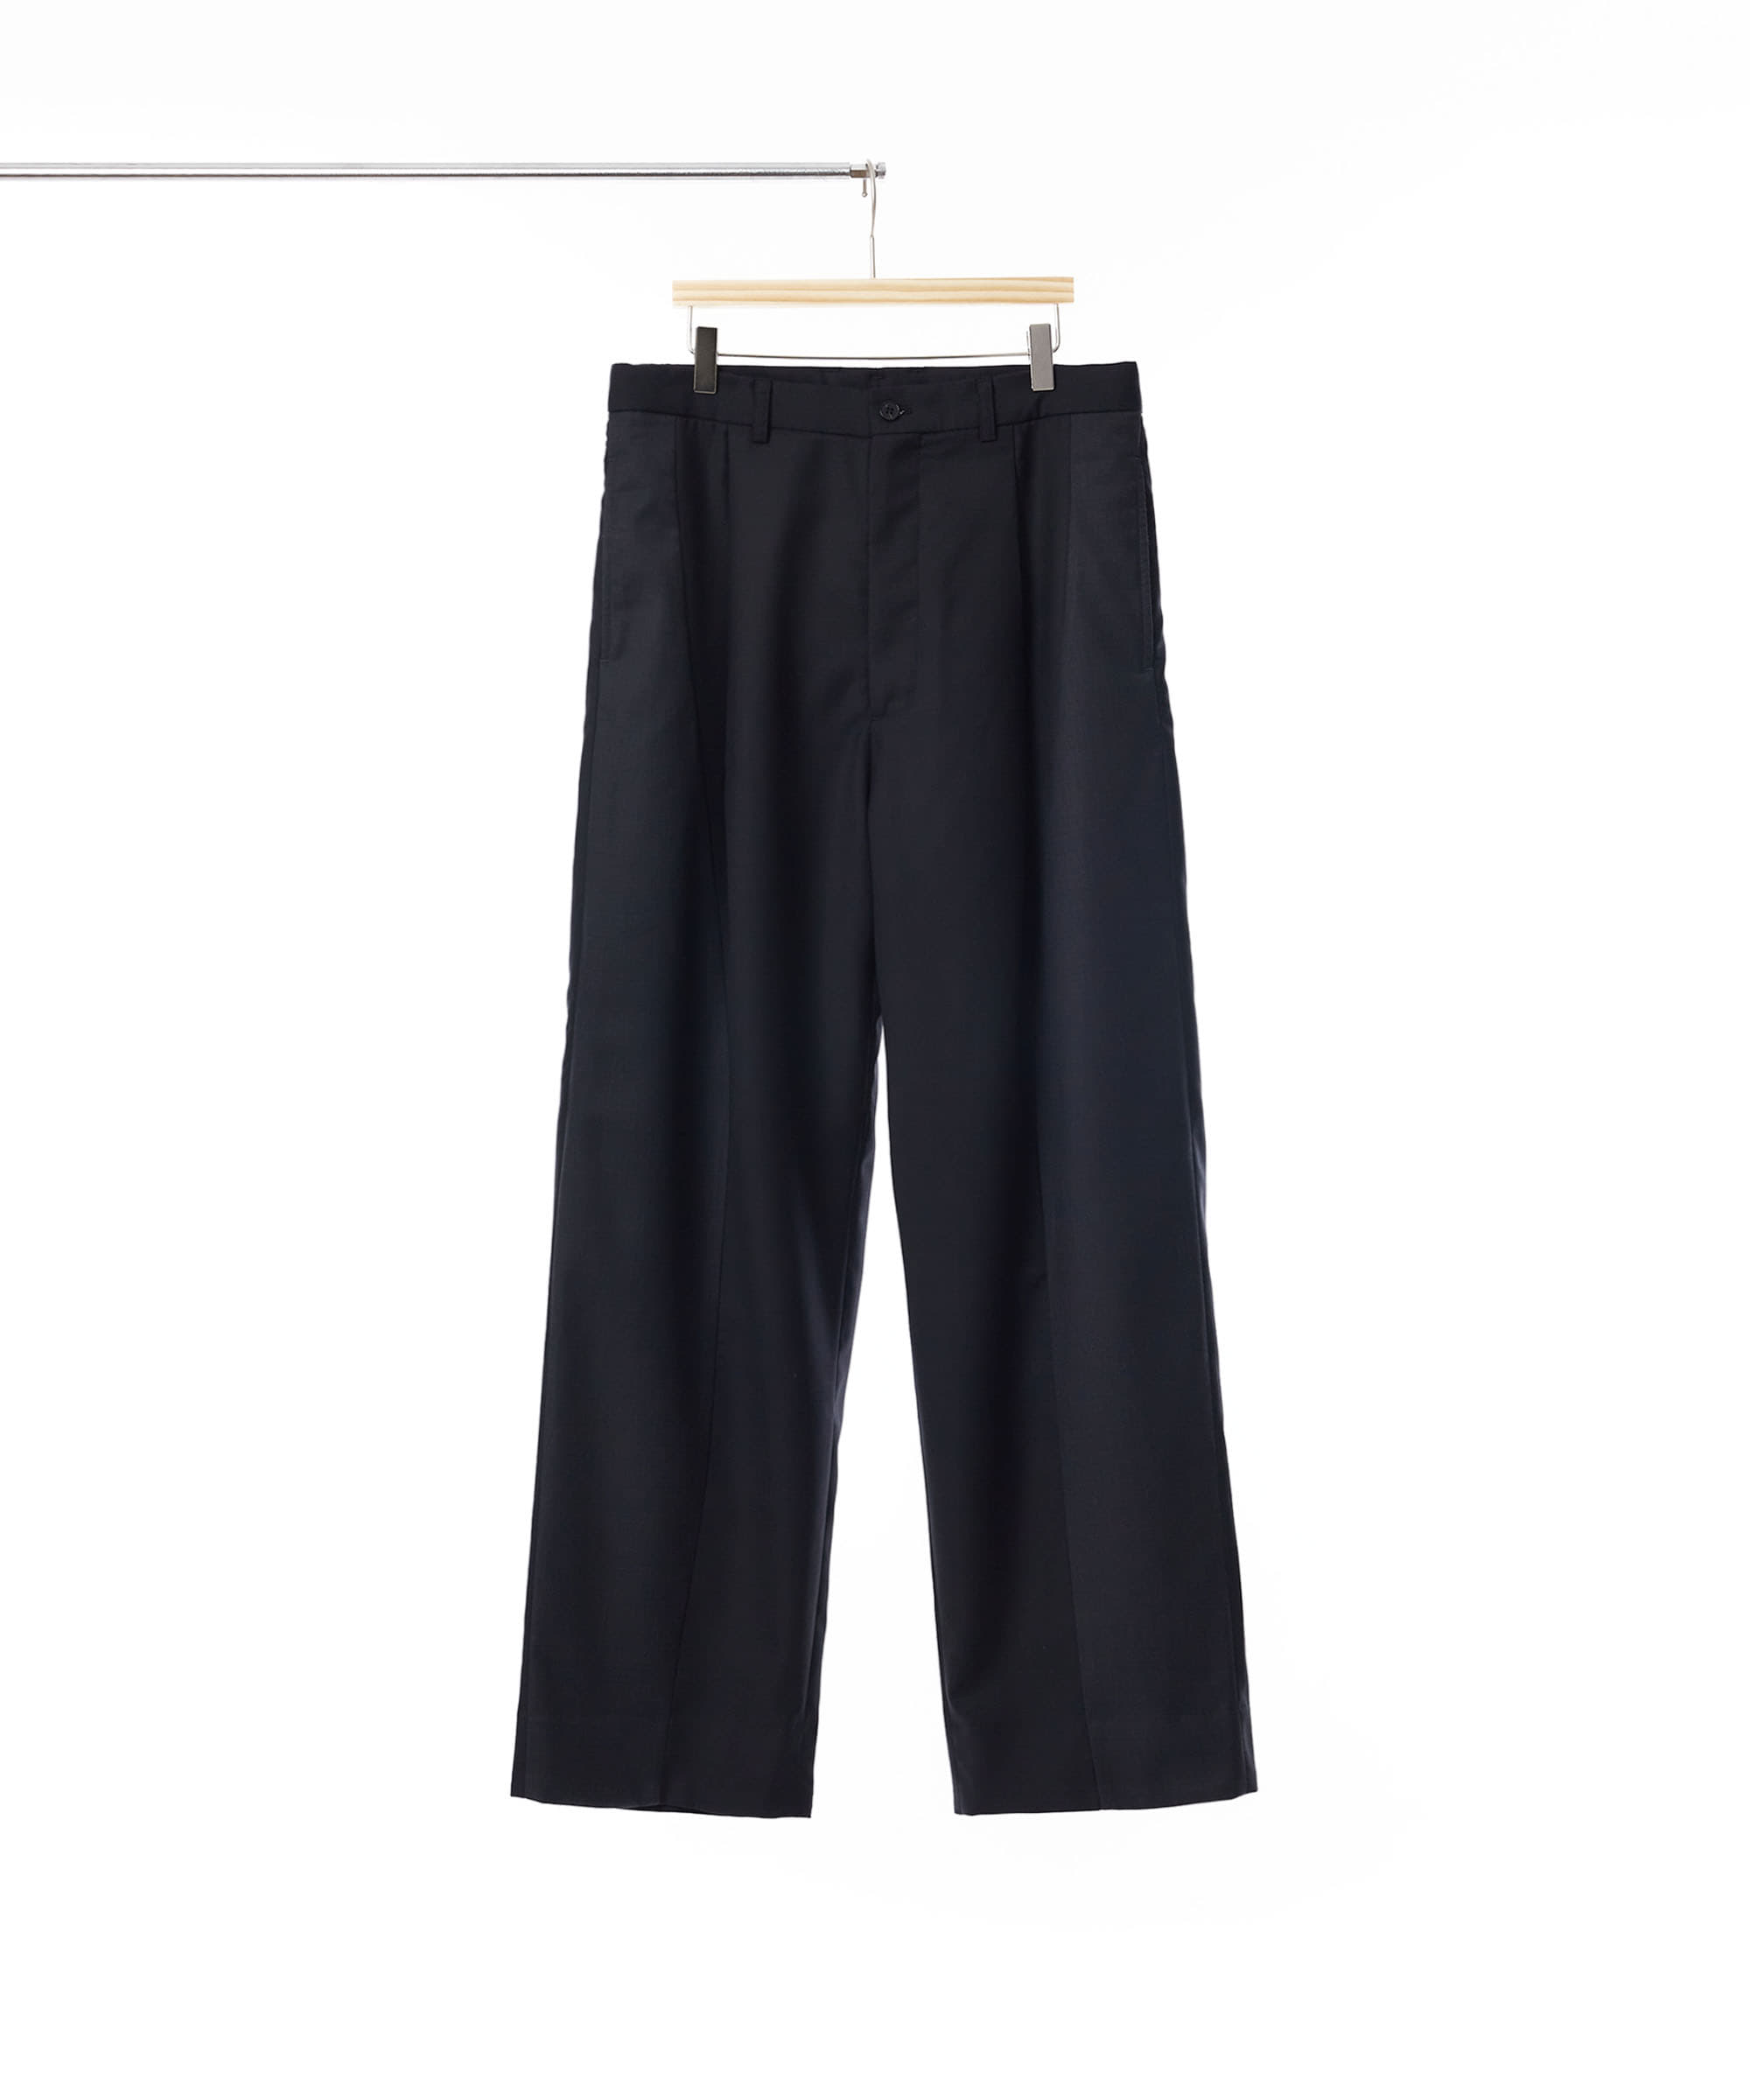 TWO TONE WIDE TROUSERS BLACK/CHARCOAL